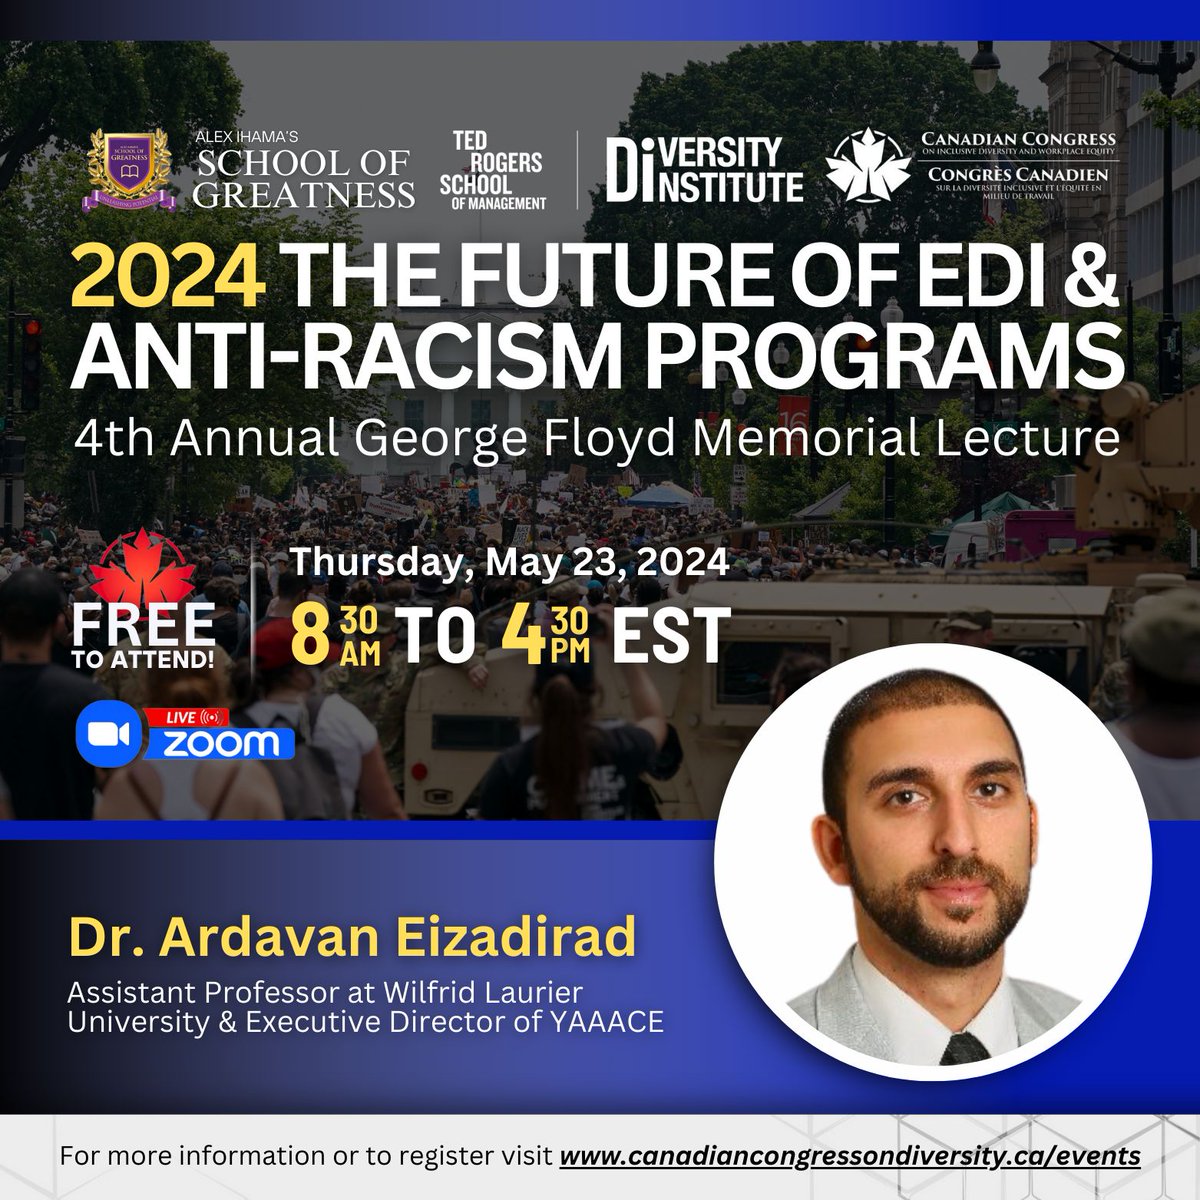 Looking forward to being part of this event hosted by @CCIDWE and @Alex_Ihama! @YAAACE_si @LaurierEdu @Laurier @LaurierResearch You can register to attend for FREE at: canadiancongressondiversity.ca/events